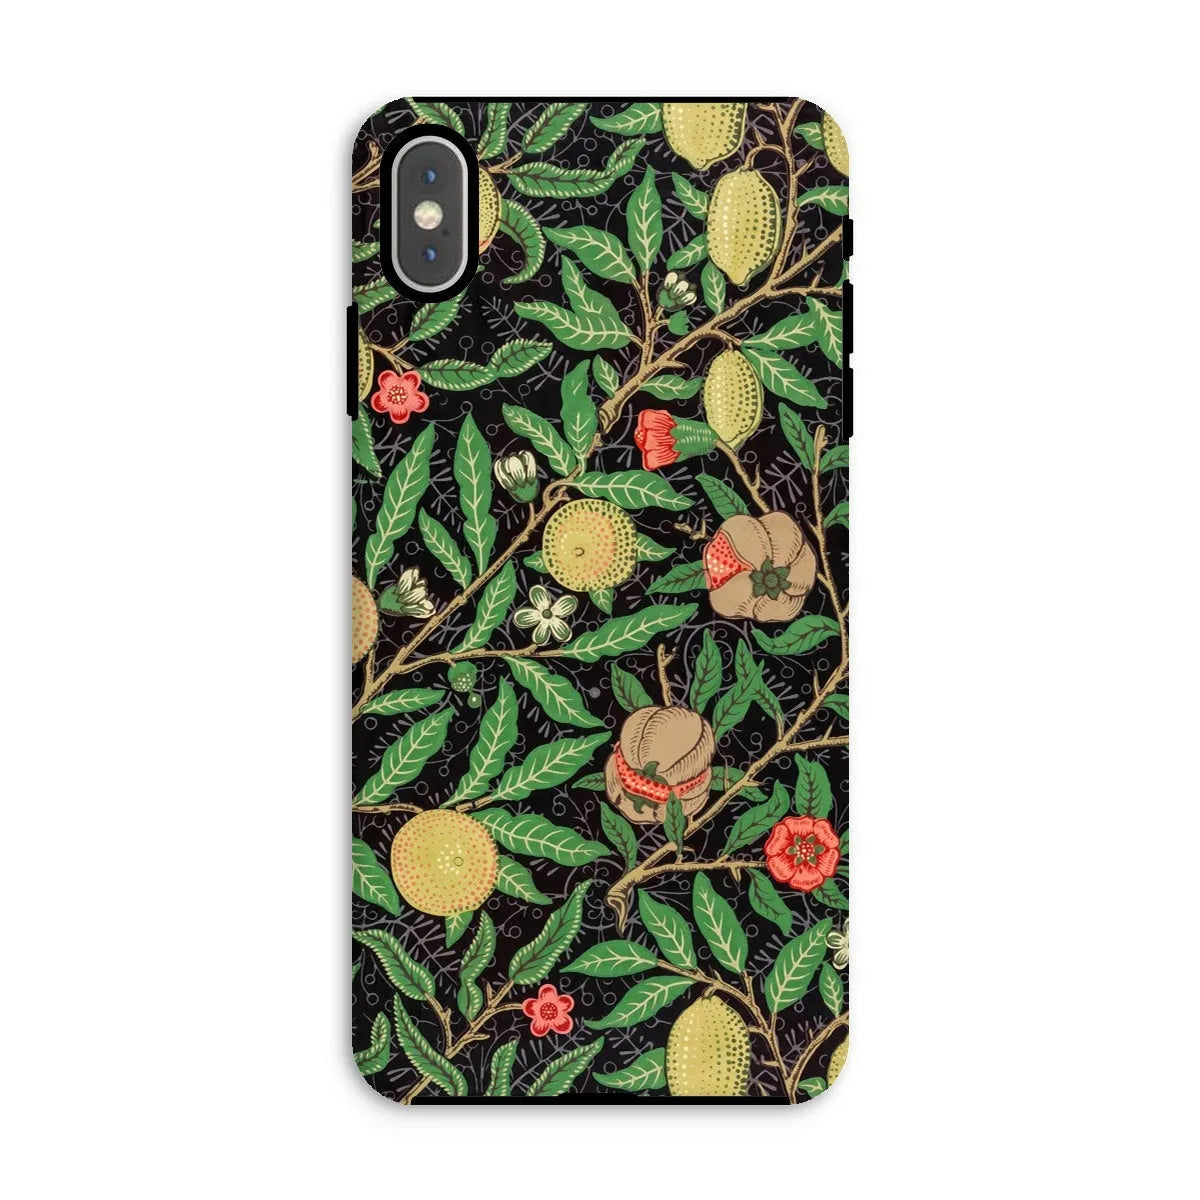 Four Fruits Too Aesthetic Pattern Phone Case - William Morris - Iphone Xs Max / Matte - Mobile Phone Cases - Aesthetic